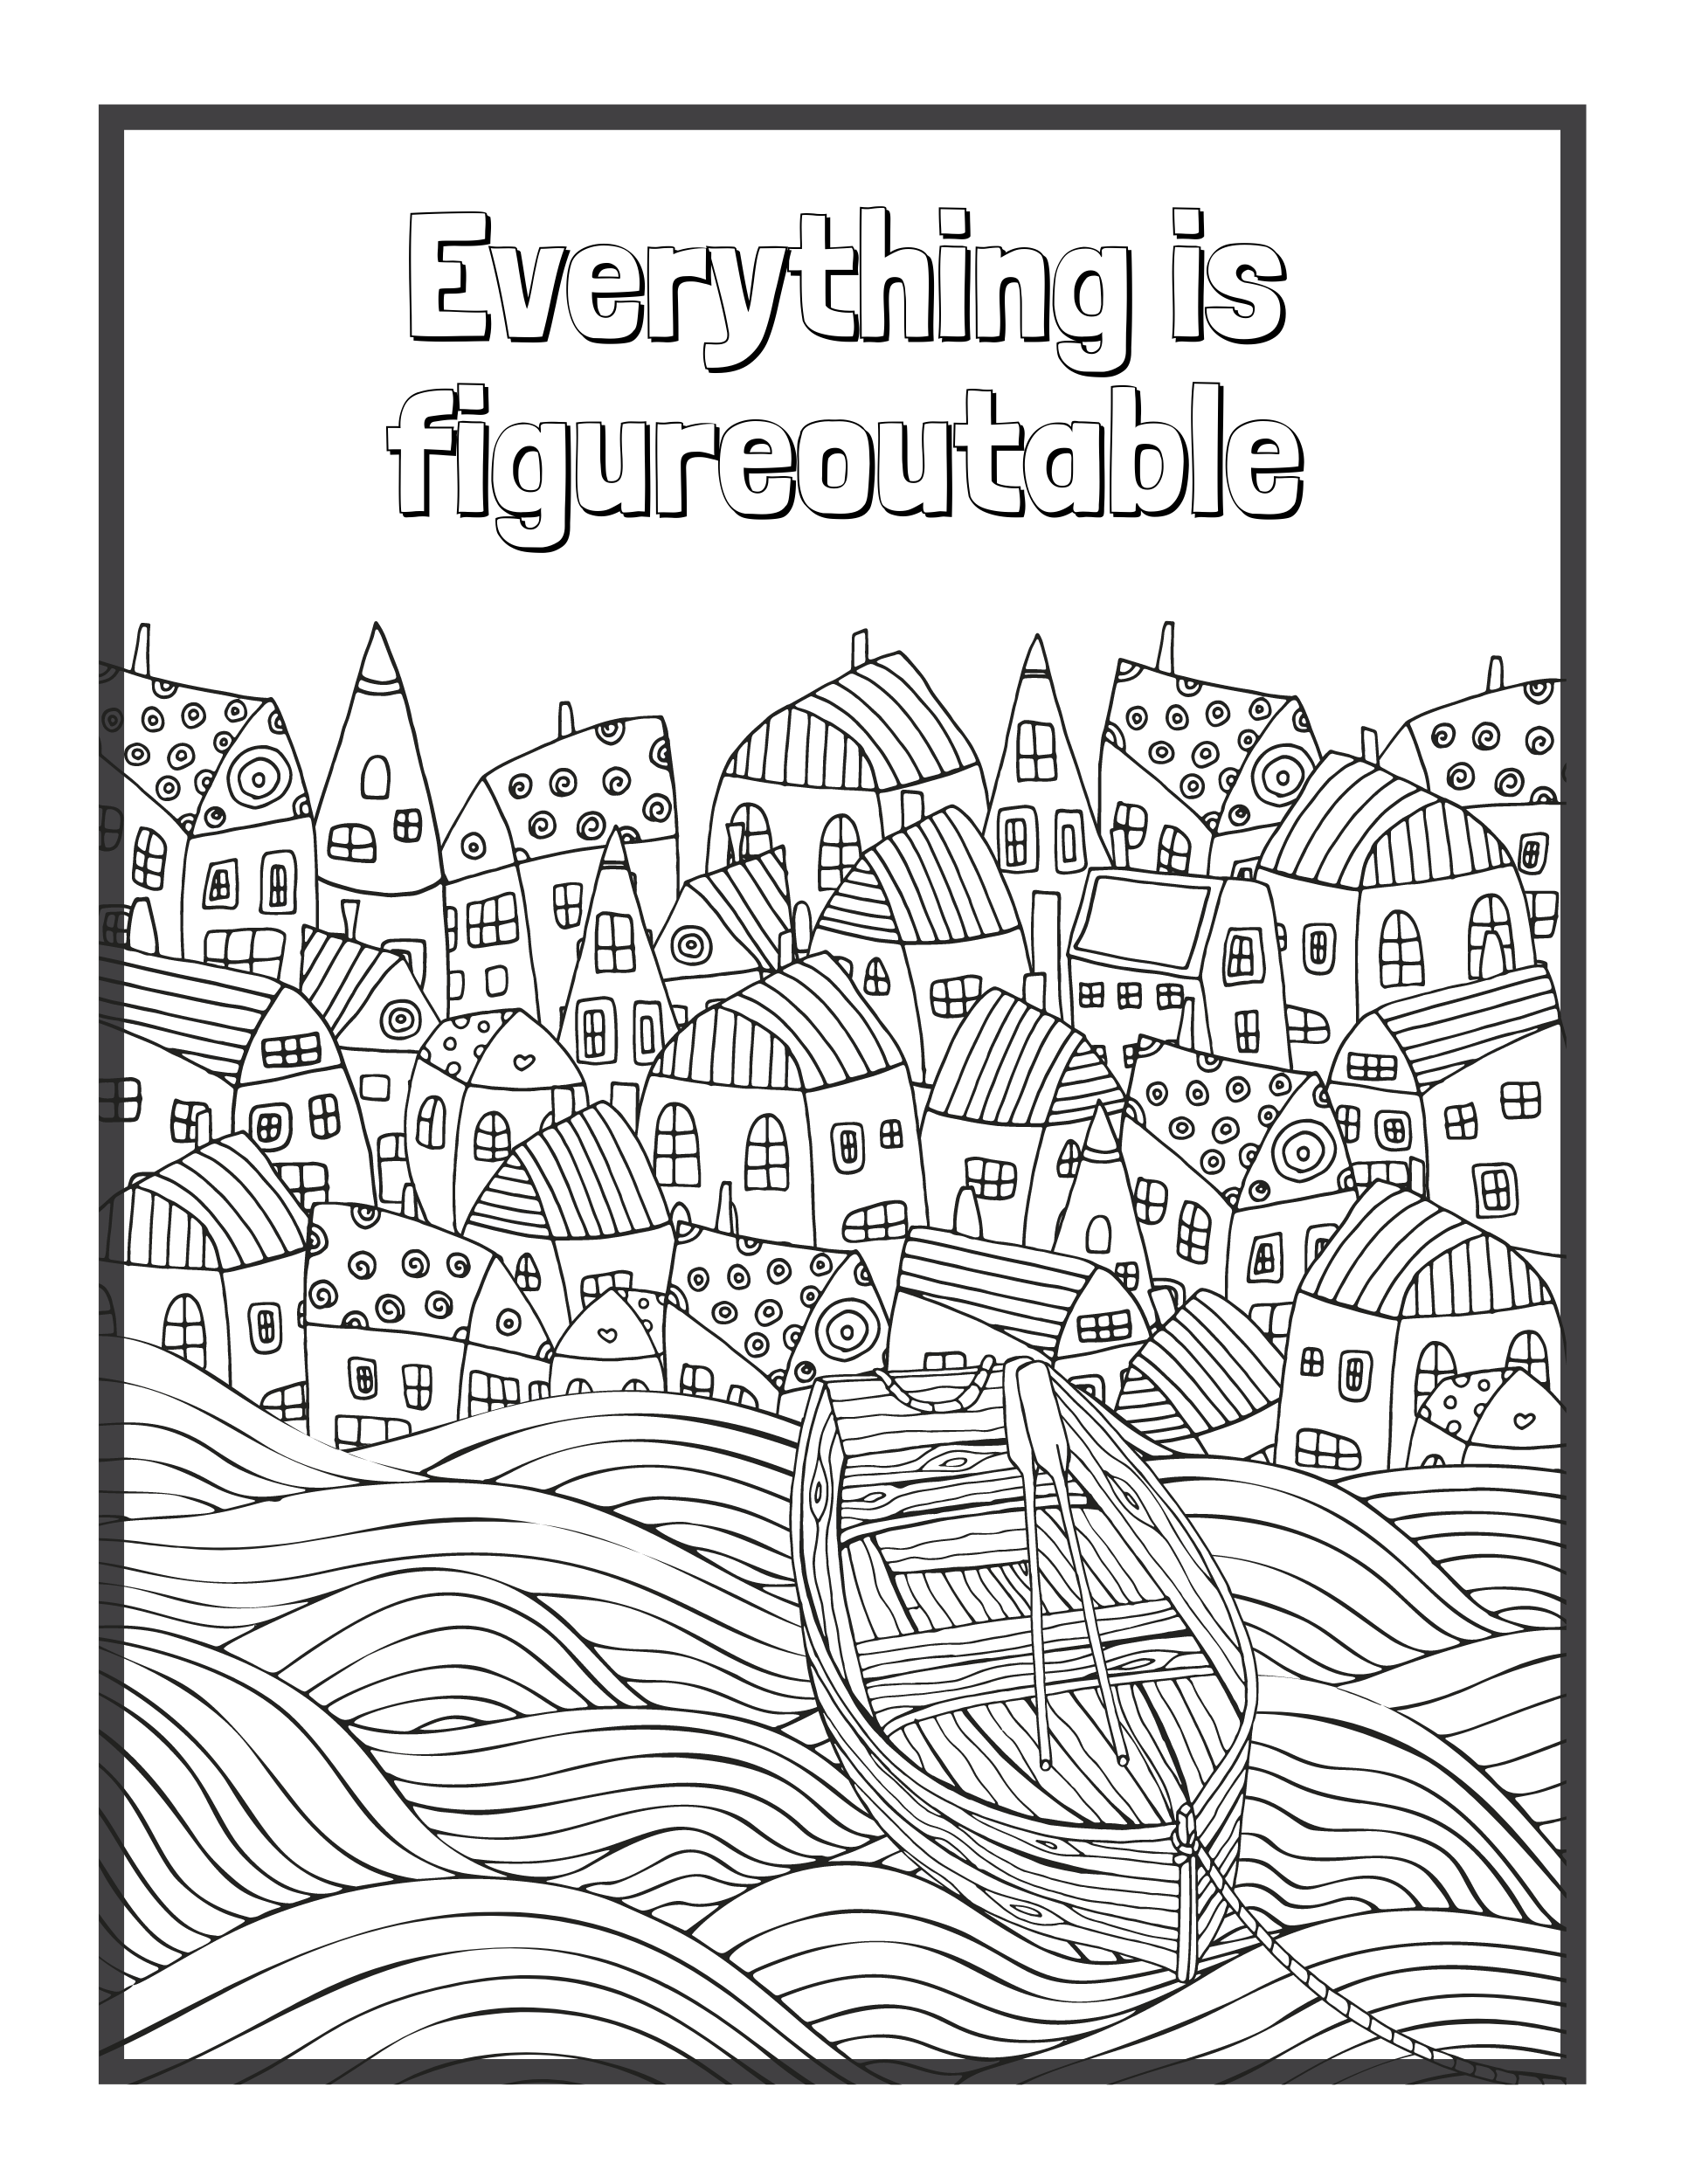 Quote coloring pages, Swear word coloring book, Coloring pages